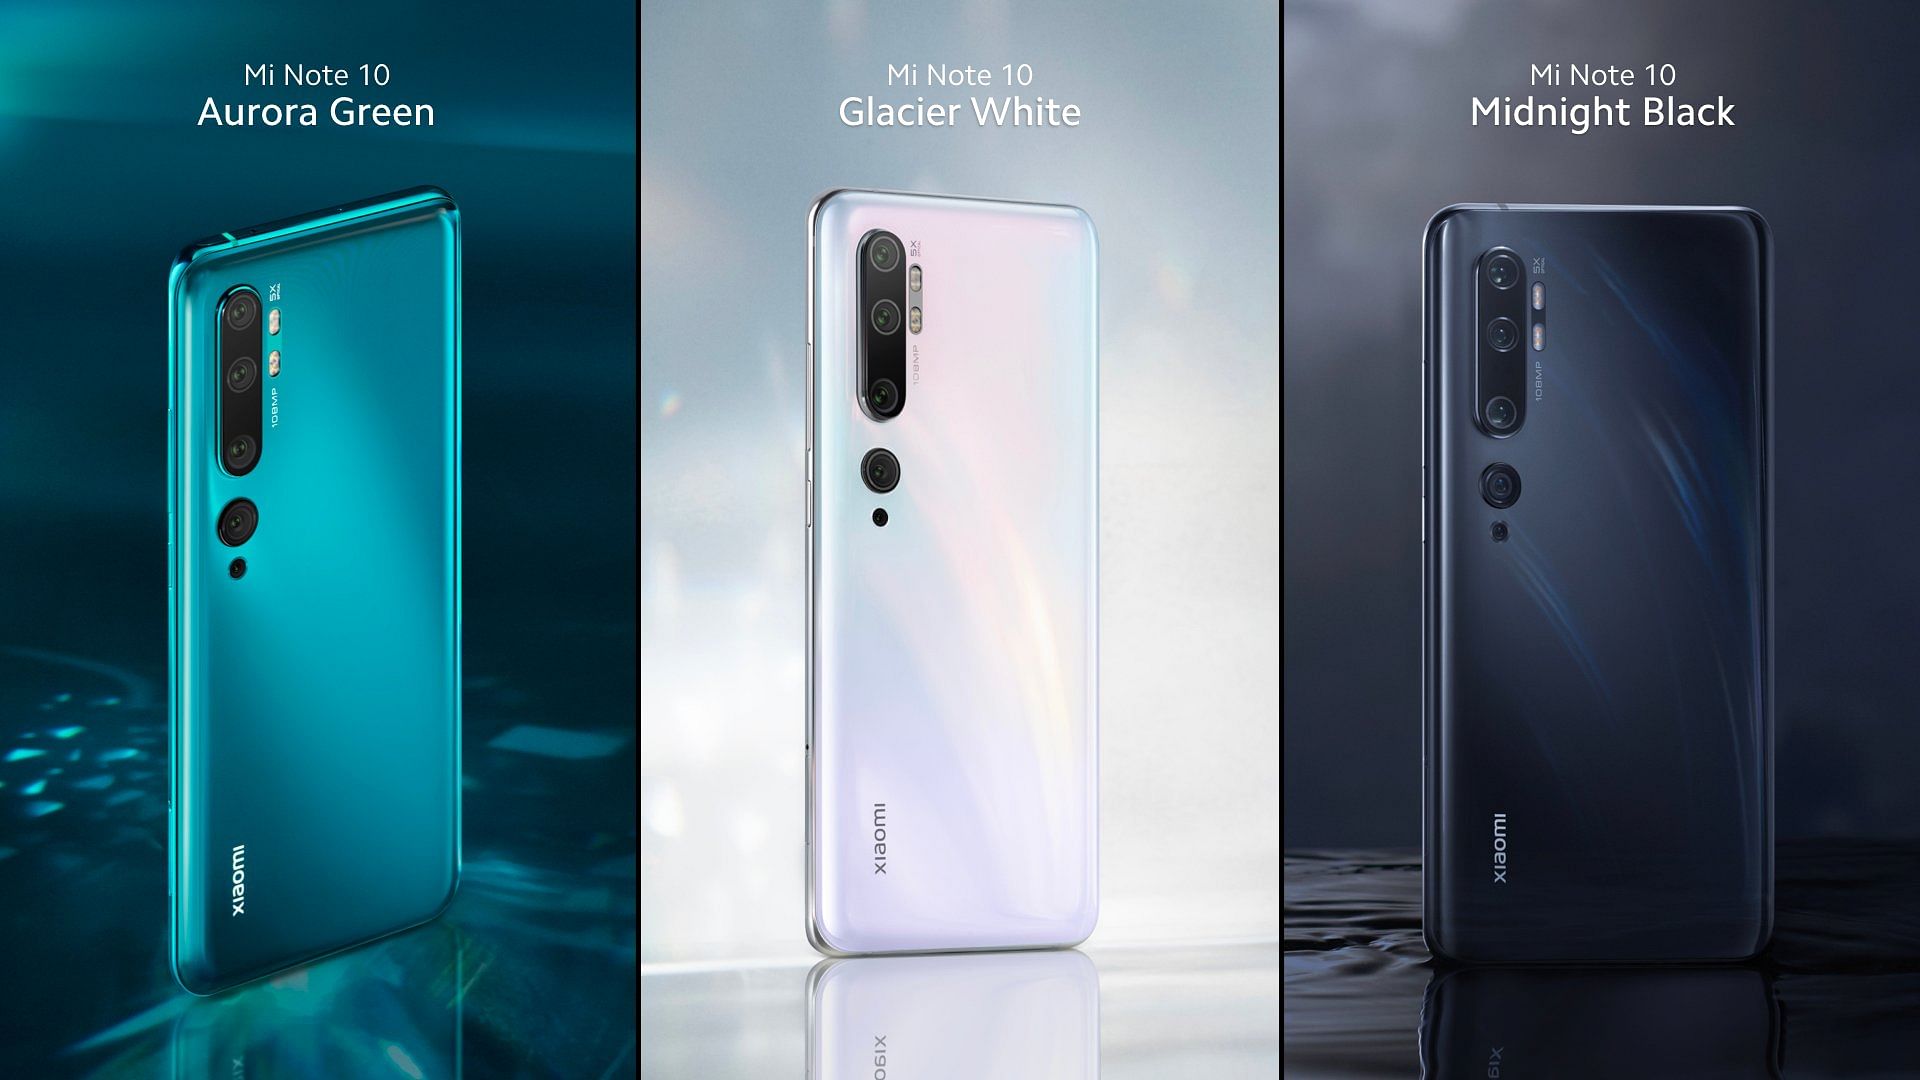 The Xiaomi Note 10 comes with a 108-megapixel primary sensor at the back.